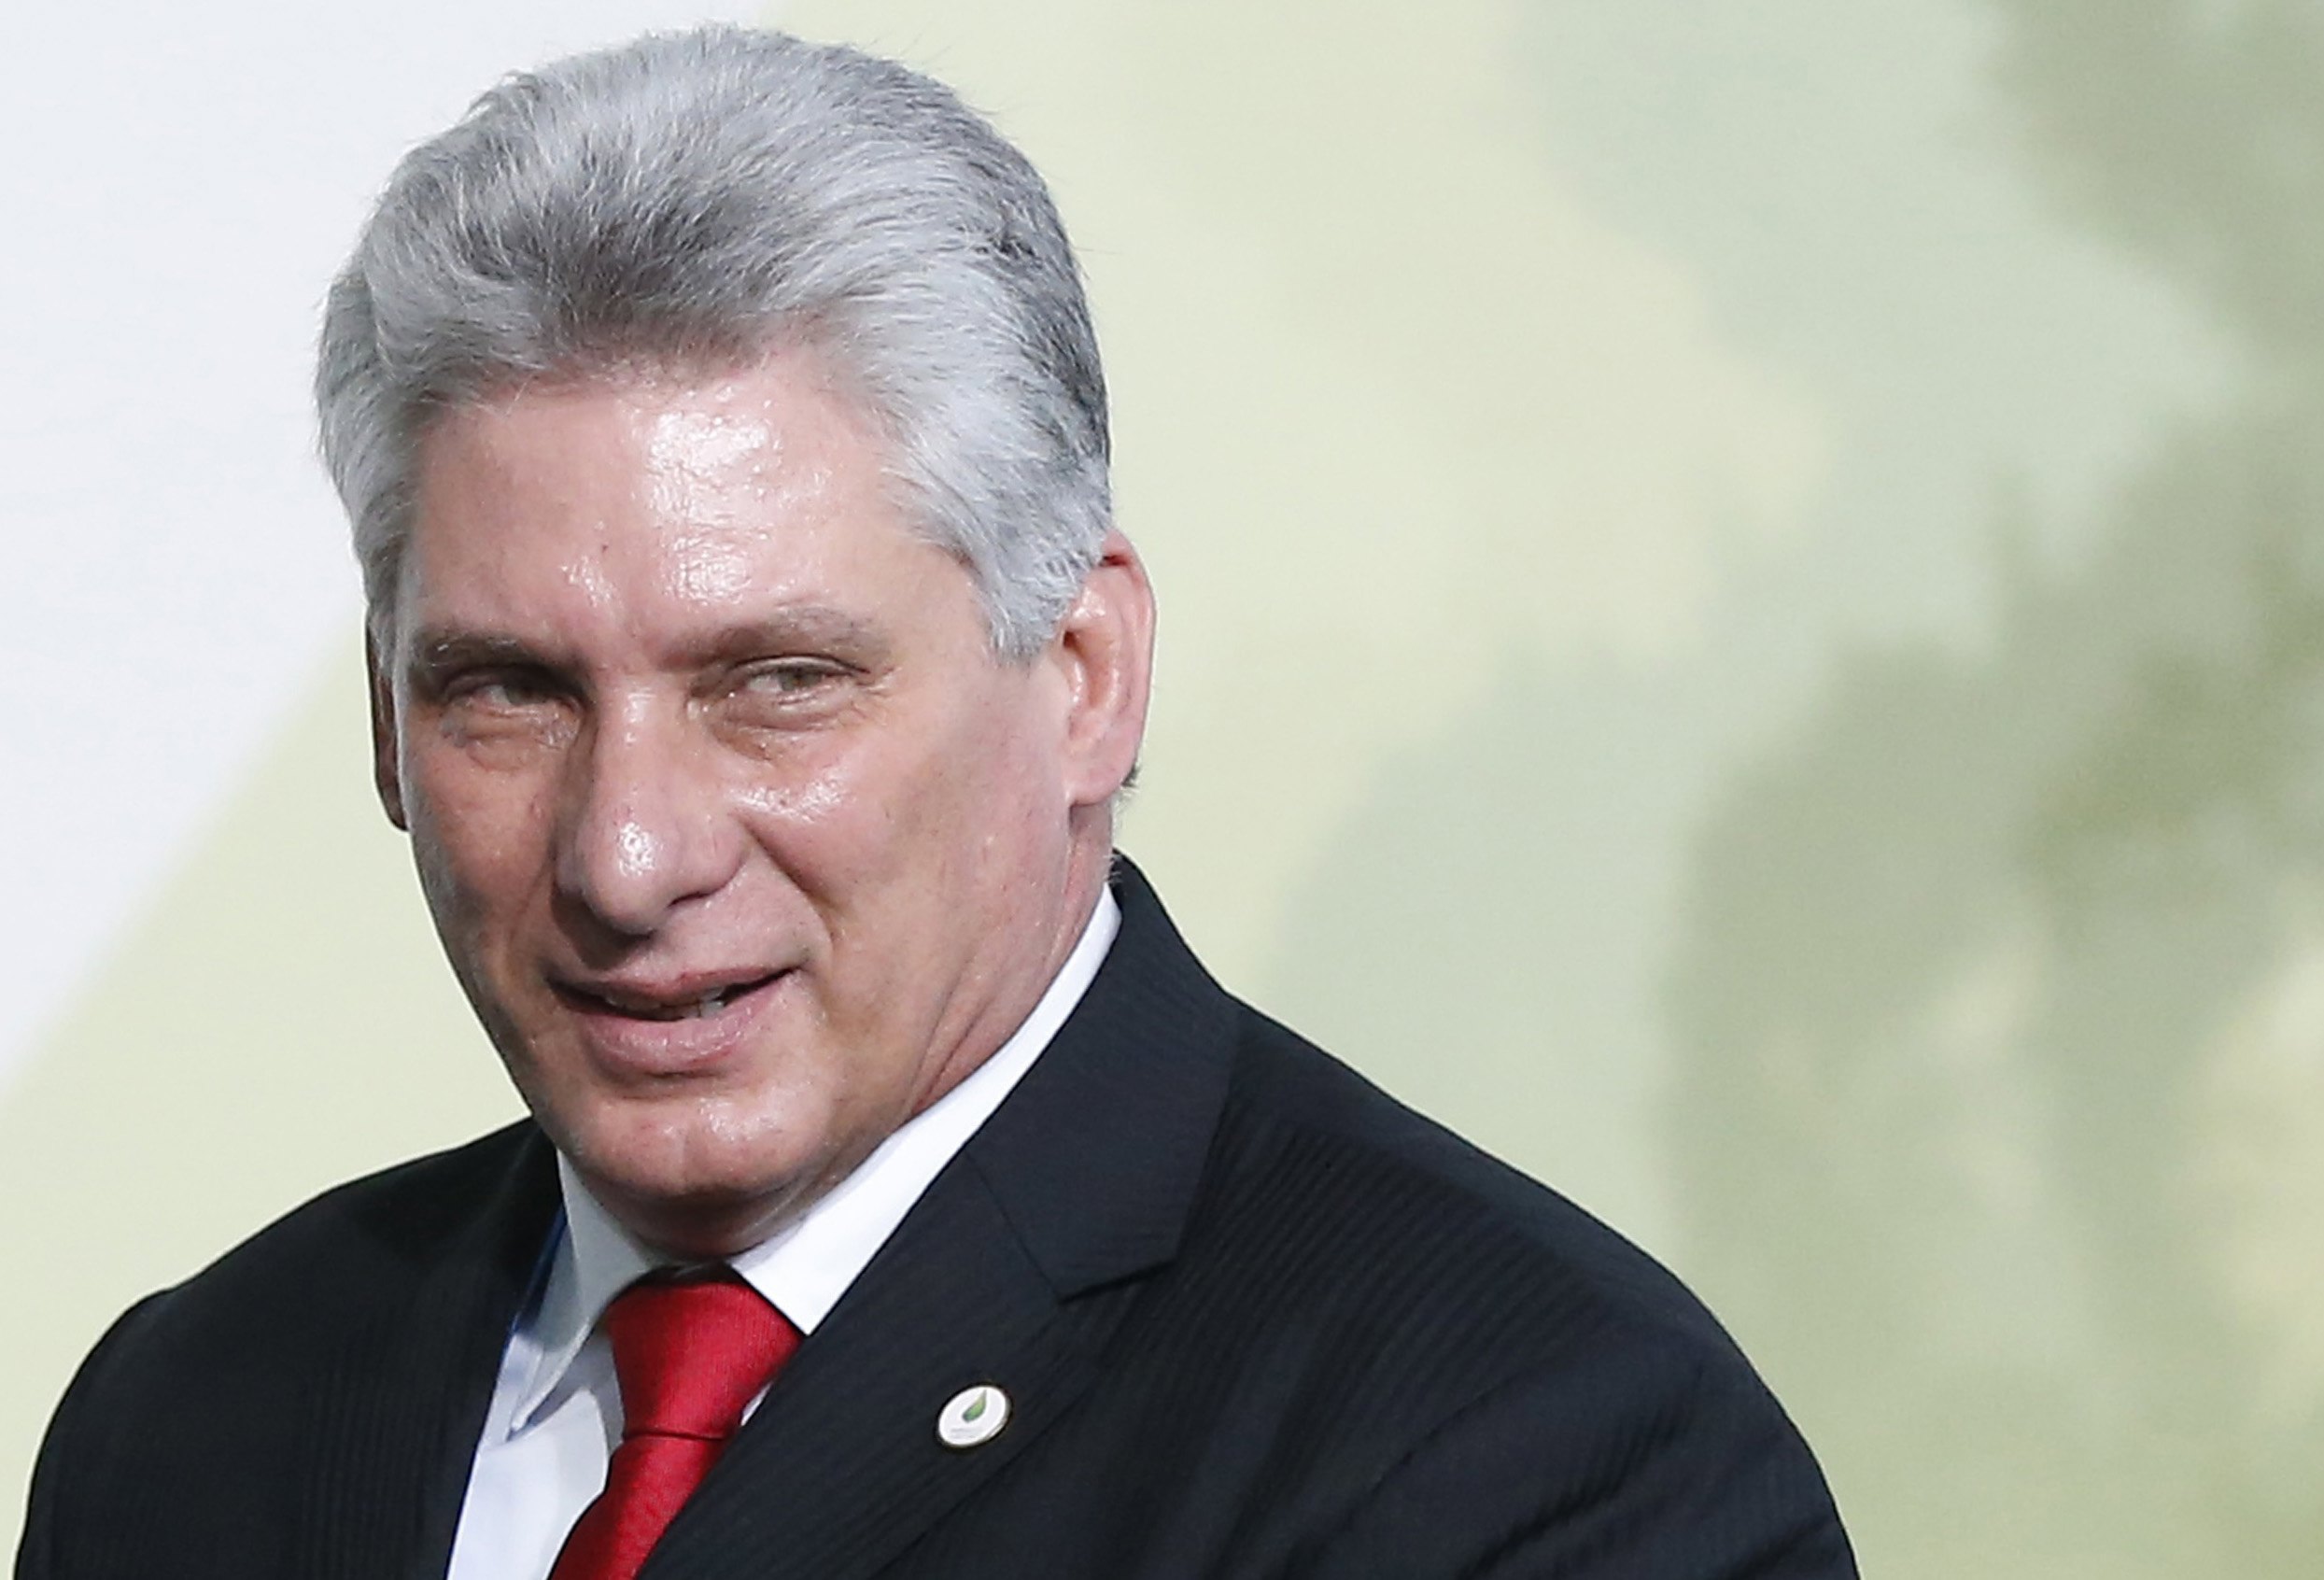 epa06678976 (FILE) - Cuban Vice-President Miguel Diaz-Canel Bermudez arrives at the COP21 World Climate Change Conference 2015 in Le Bourget, north of Paris, France, 30 November 2015 (reissued 19 April 2018). The Cuban government on 18 April 2018 nominated Diaz-Canel as the only candidate to succeed President Raul Castro, considered the end of the Castro era.  EPA/GUILLAUME HORCAJUELO/POOL MAXPPP OUT